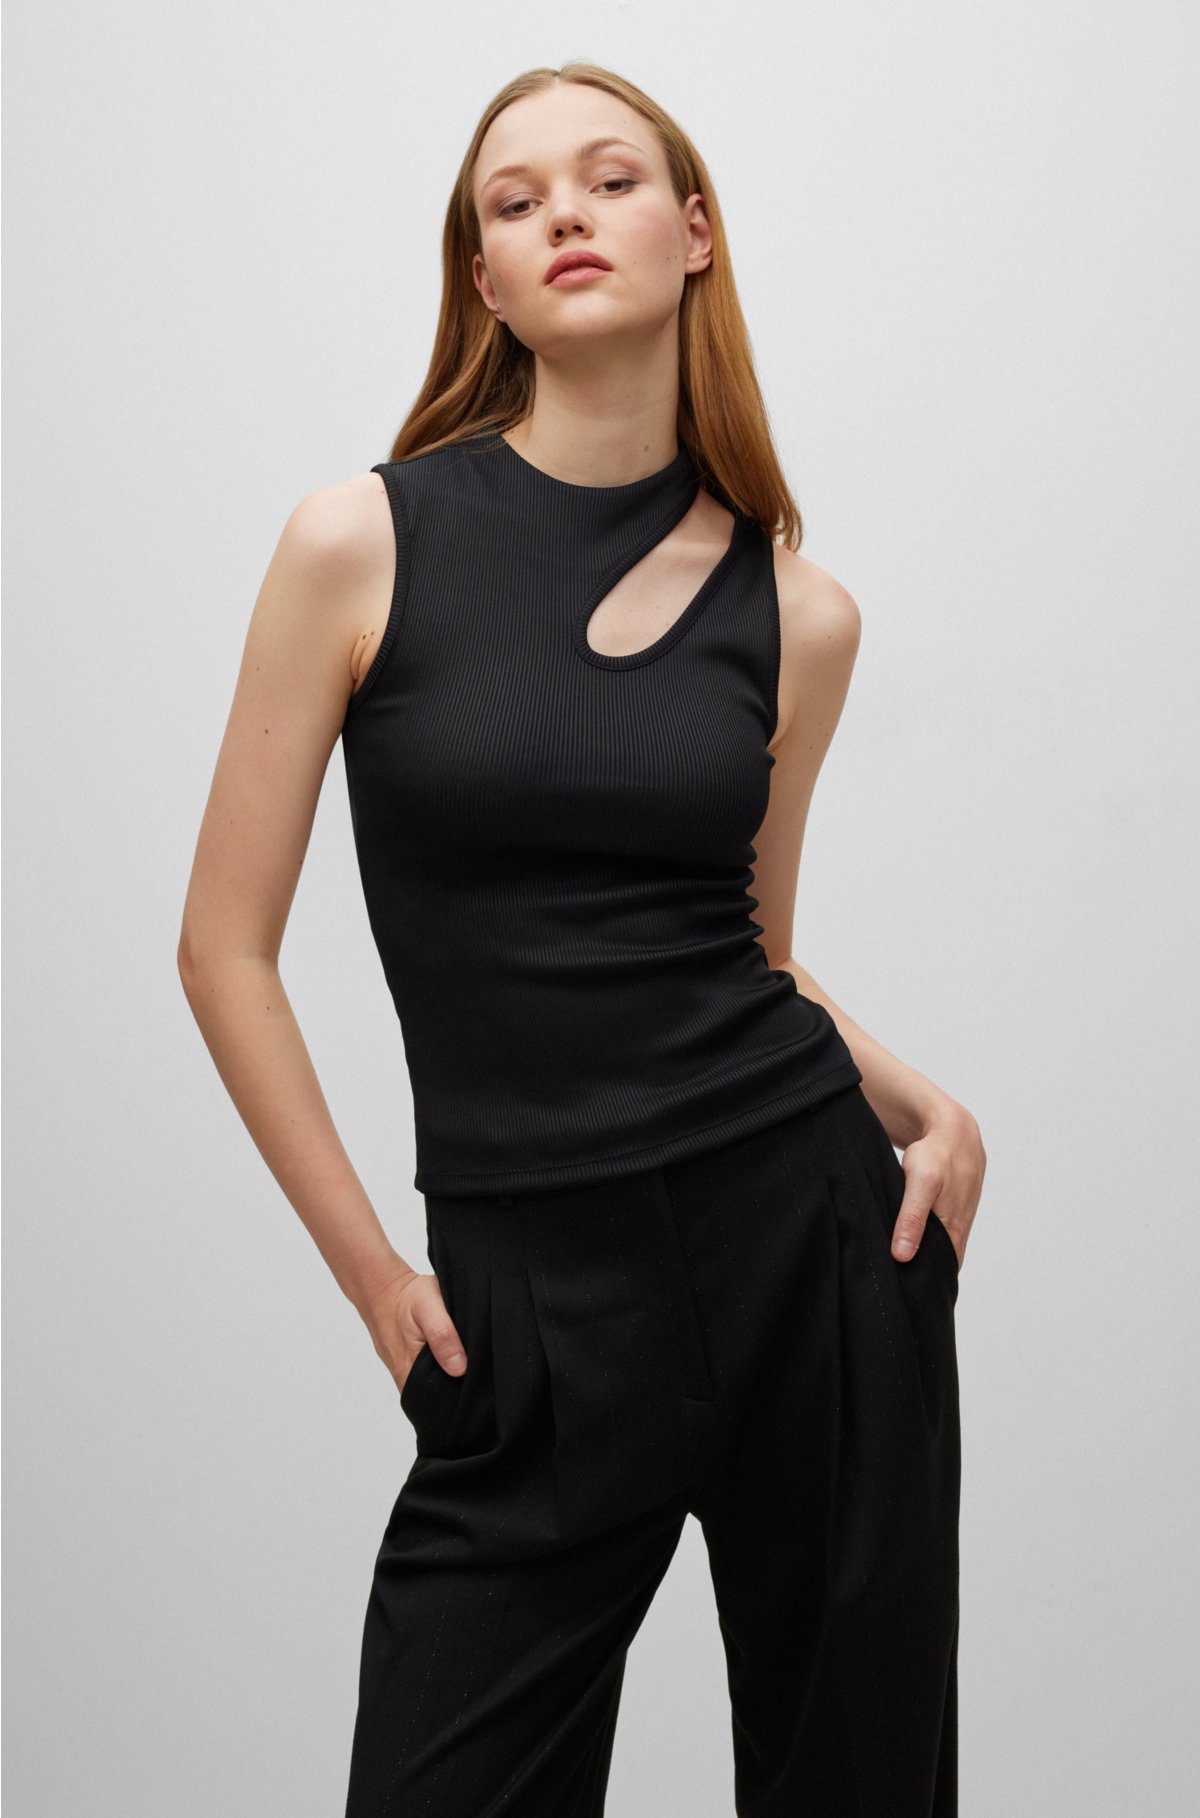 Sleeveless ribbed top with cut-out detail